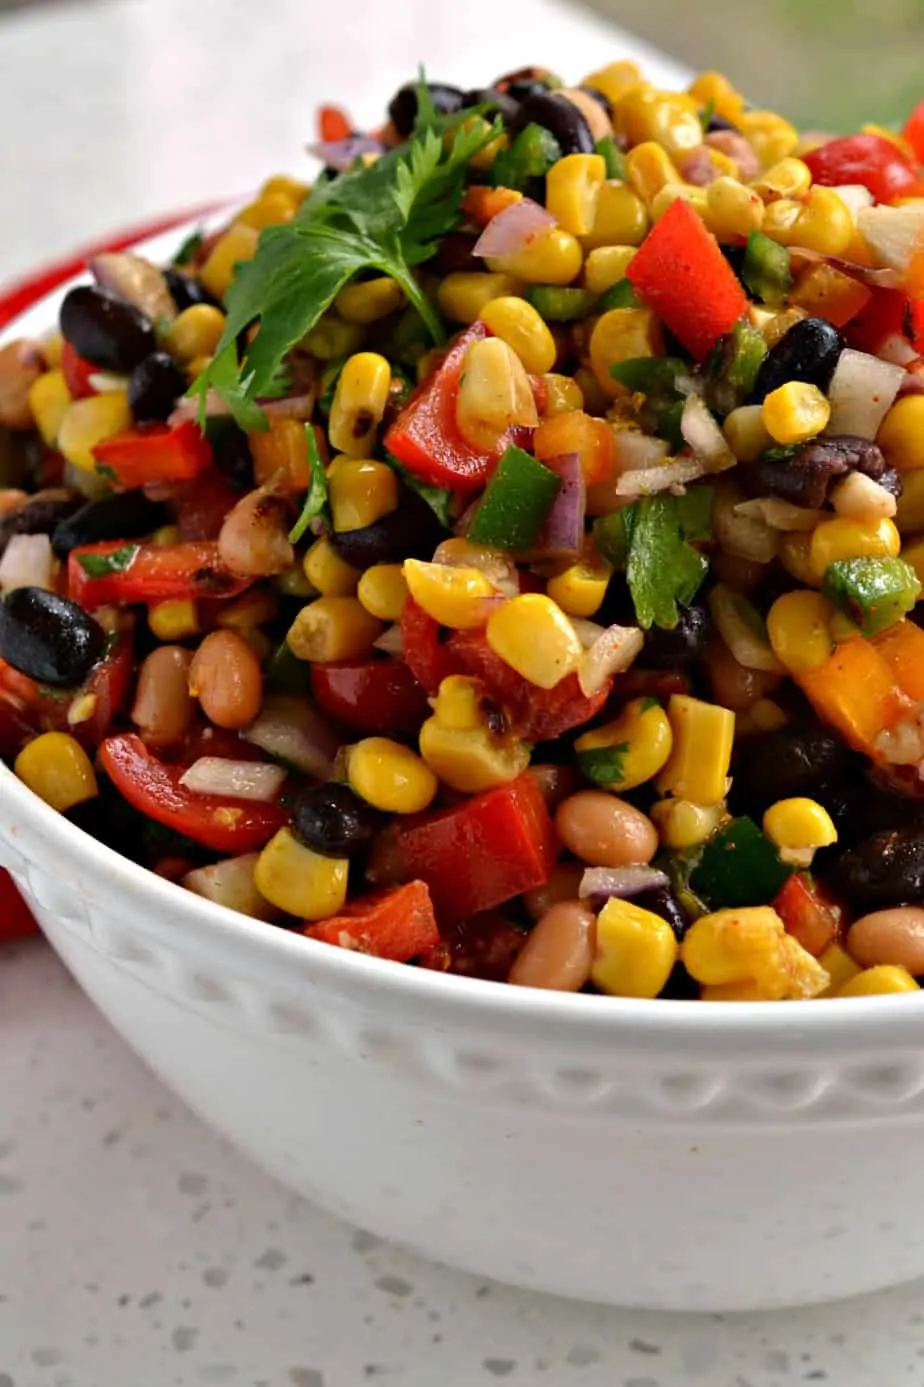 this bean salad is the perfect anytime snack for picnics, potlucks, reunions, and barbecues. Make a big batch because everyone loves it!